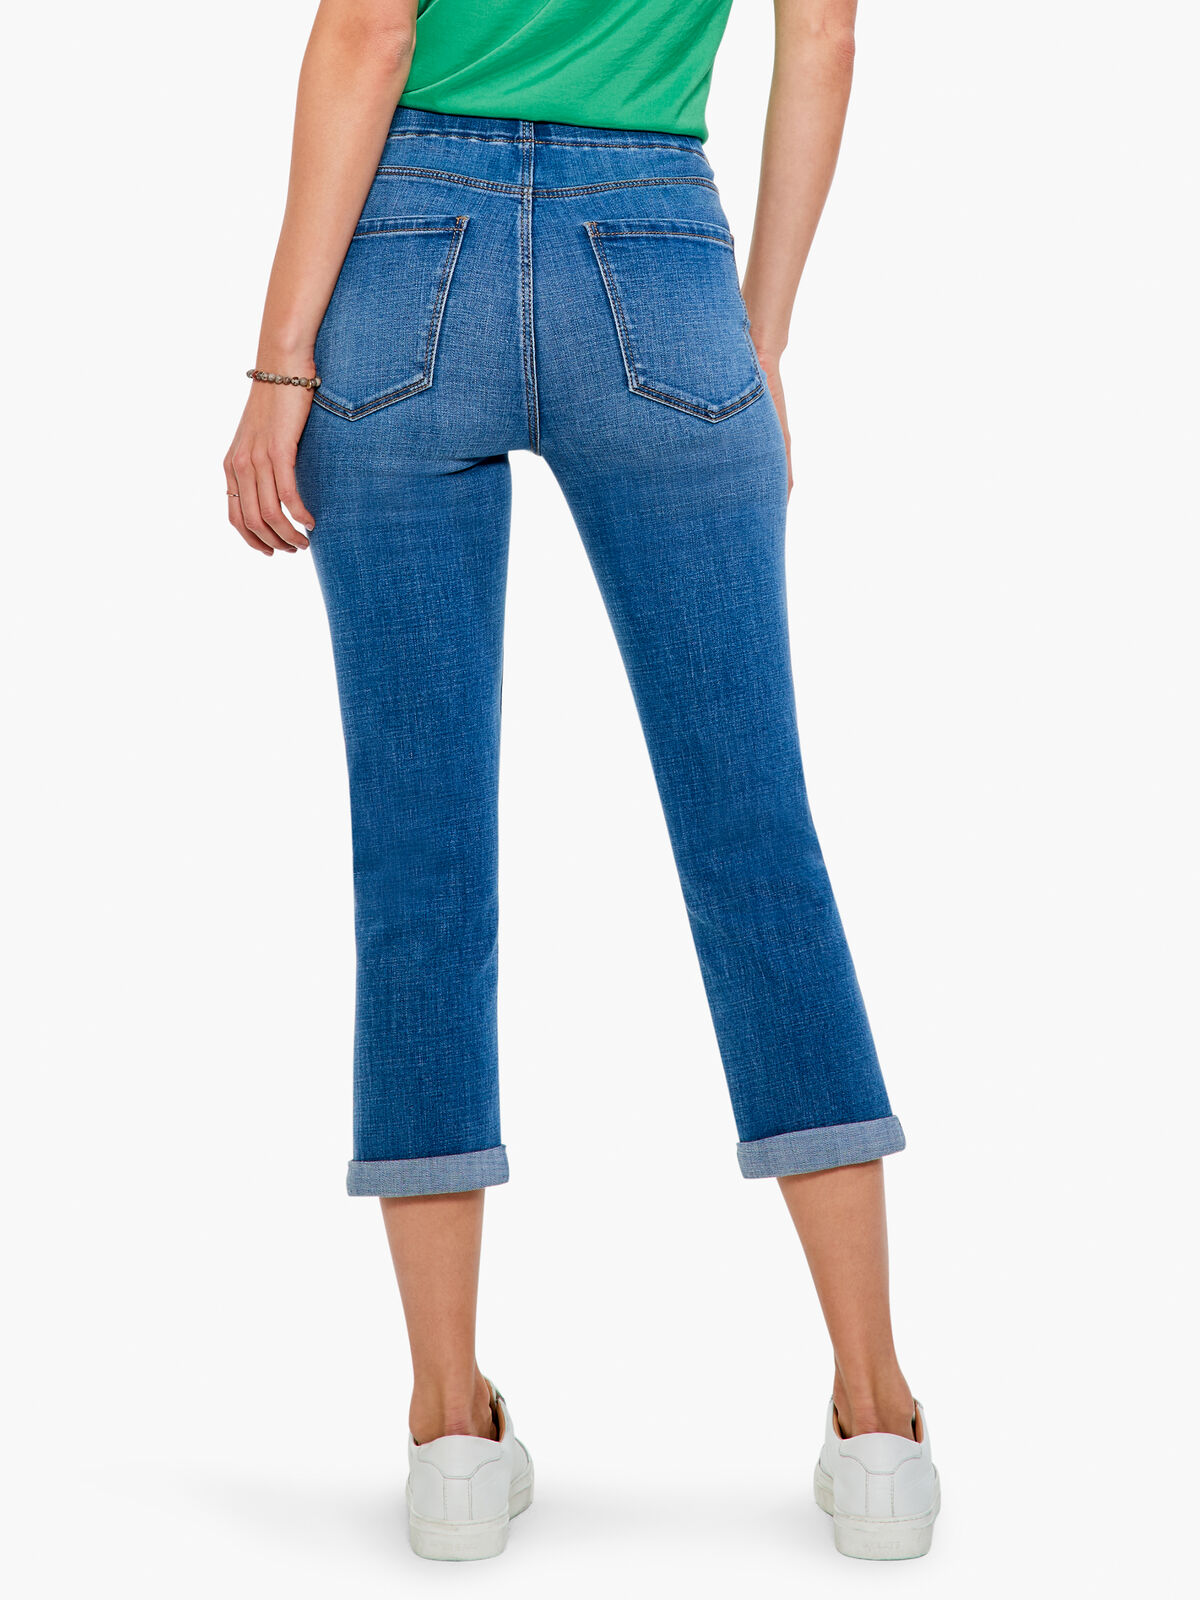 Liverpool Chloe Crop Skinny Jean with Rolled Cuff